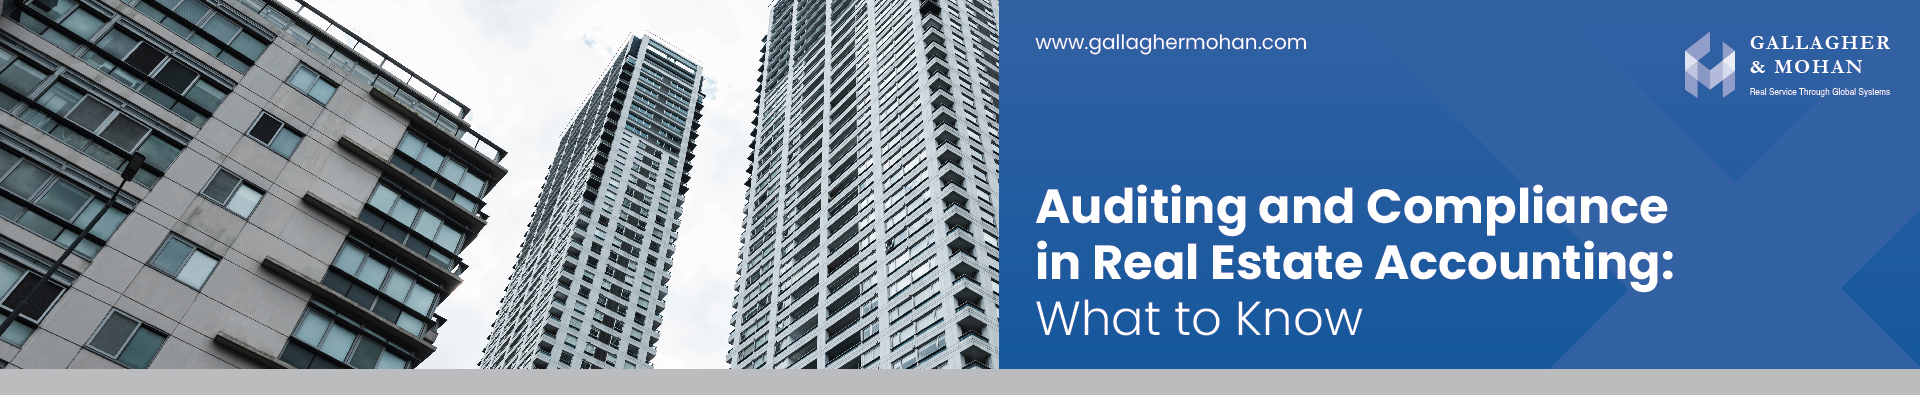 Auditing And Compliance In Real Estate Accounting What To Know